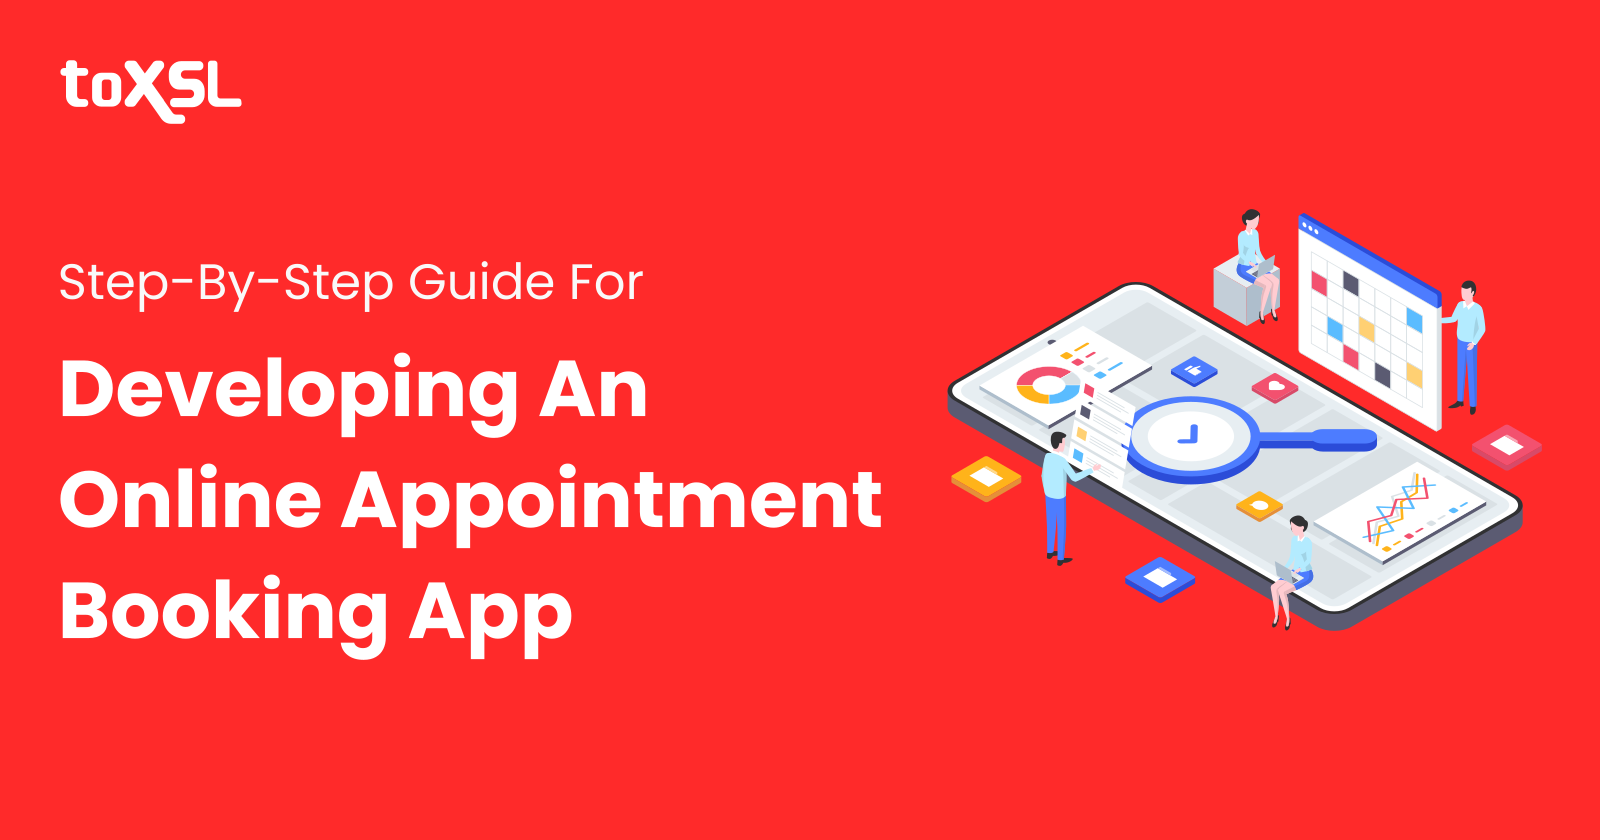 Step-by-step Guide For Developing An Online Appointment Booking App From Scratch